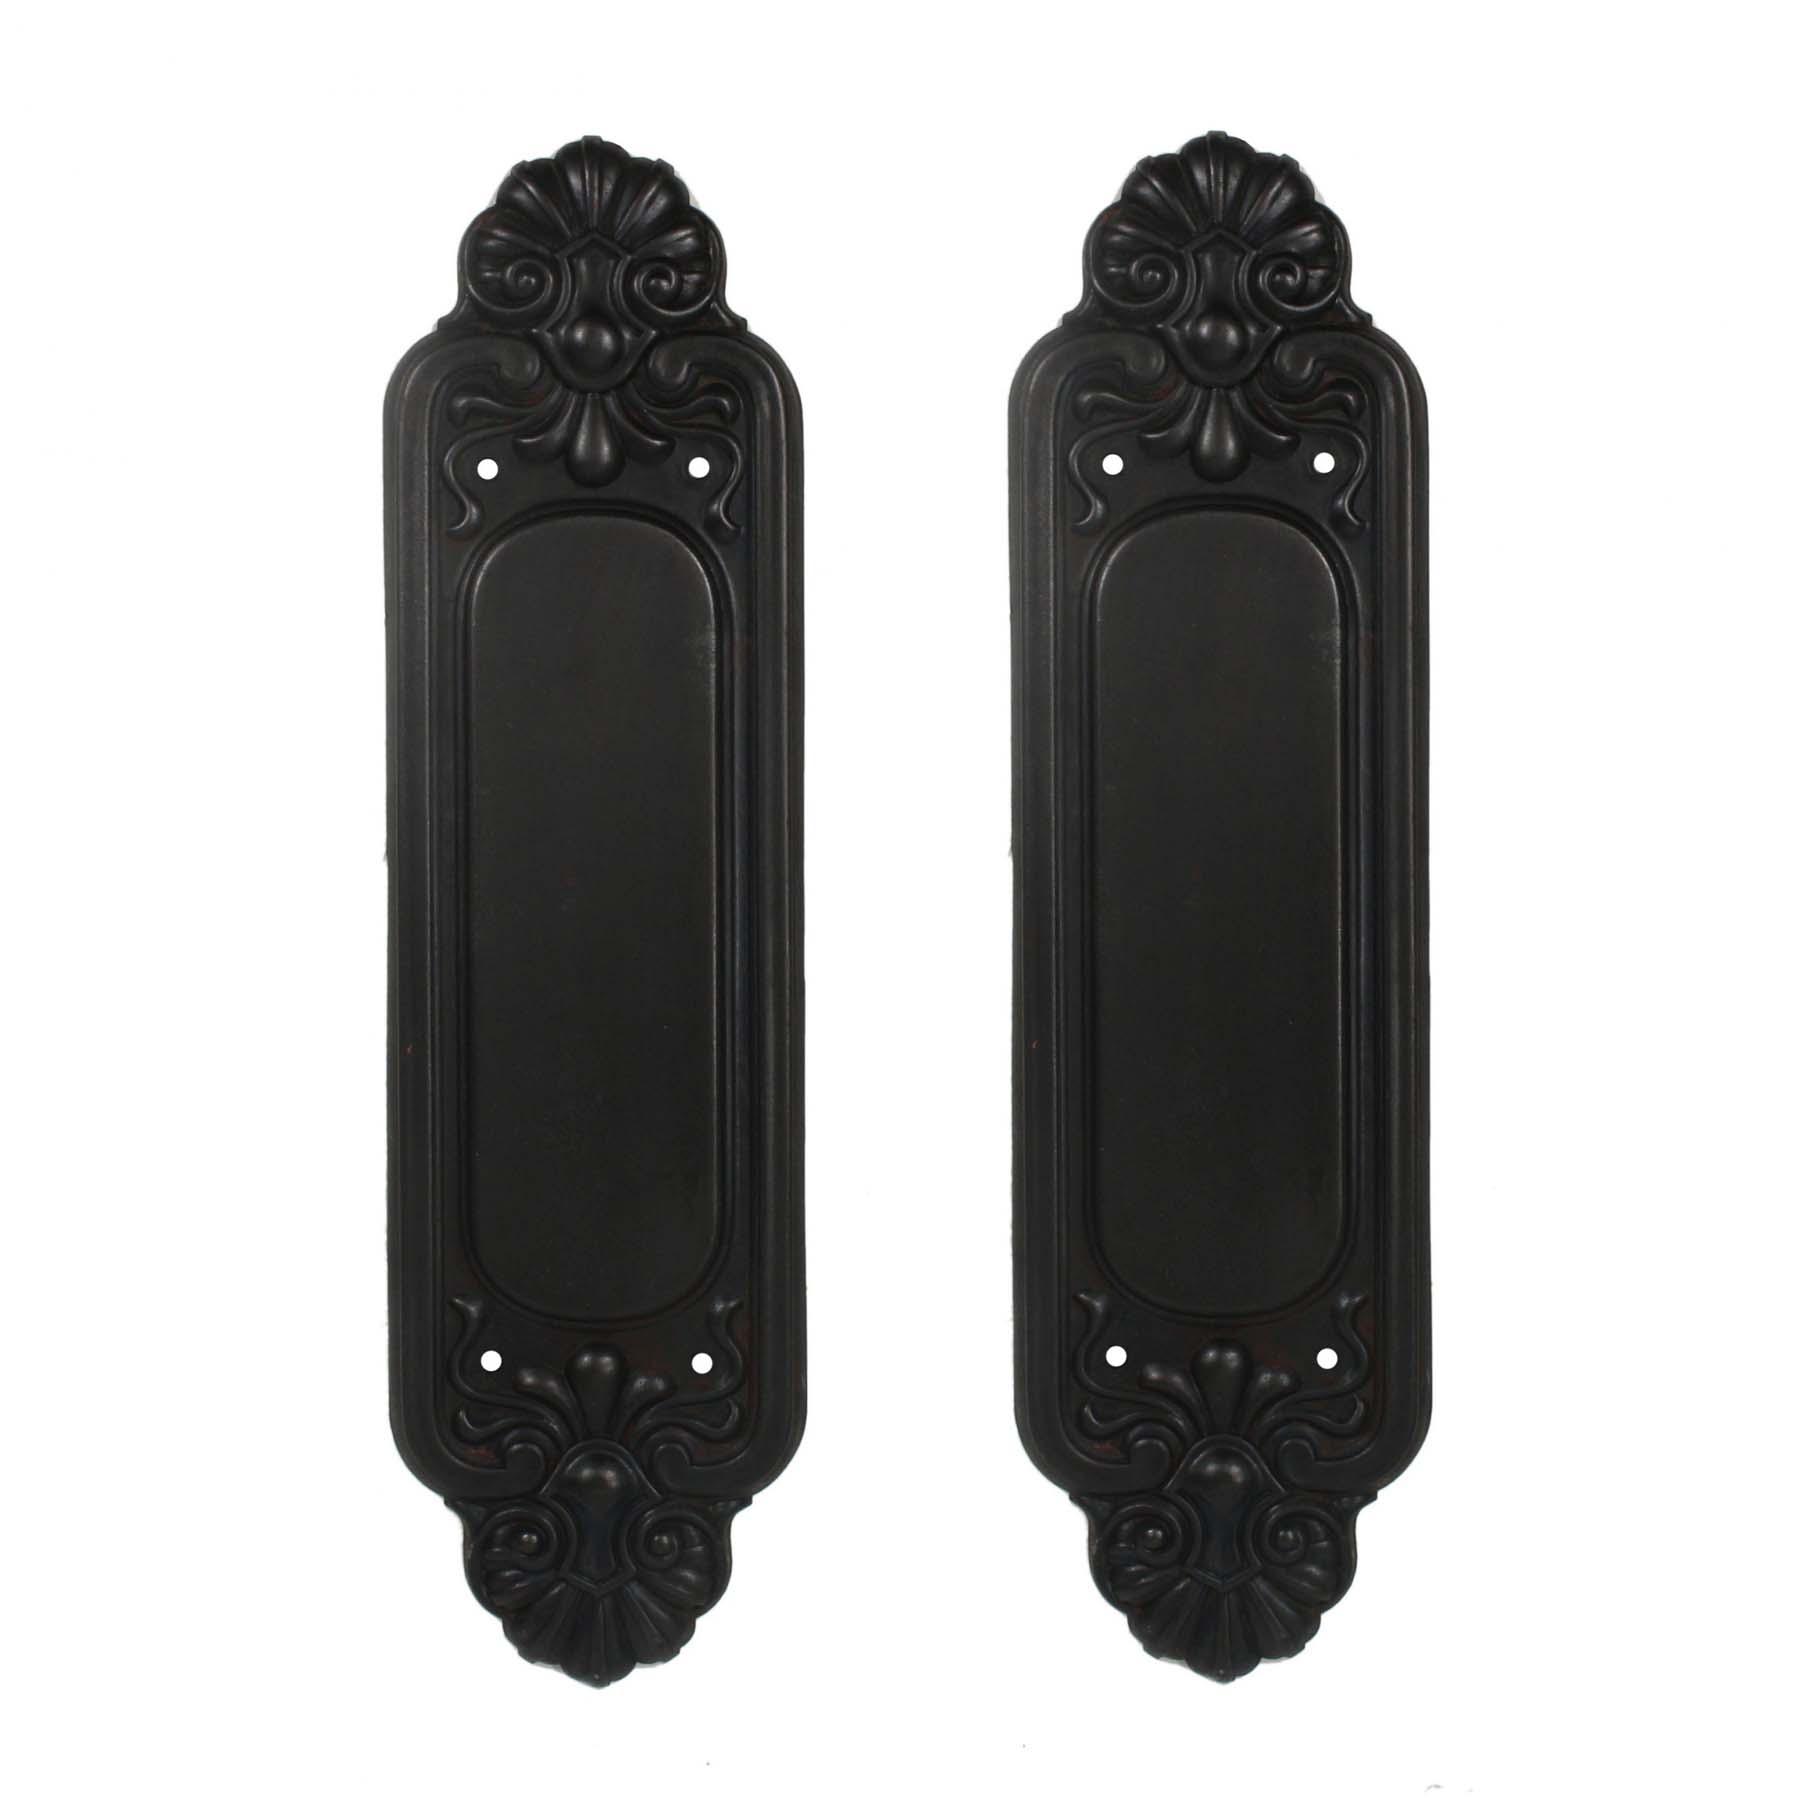 SOLD Antique Neoclassical Anthemion Push Plates, c. 1905-0